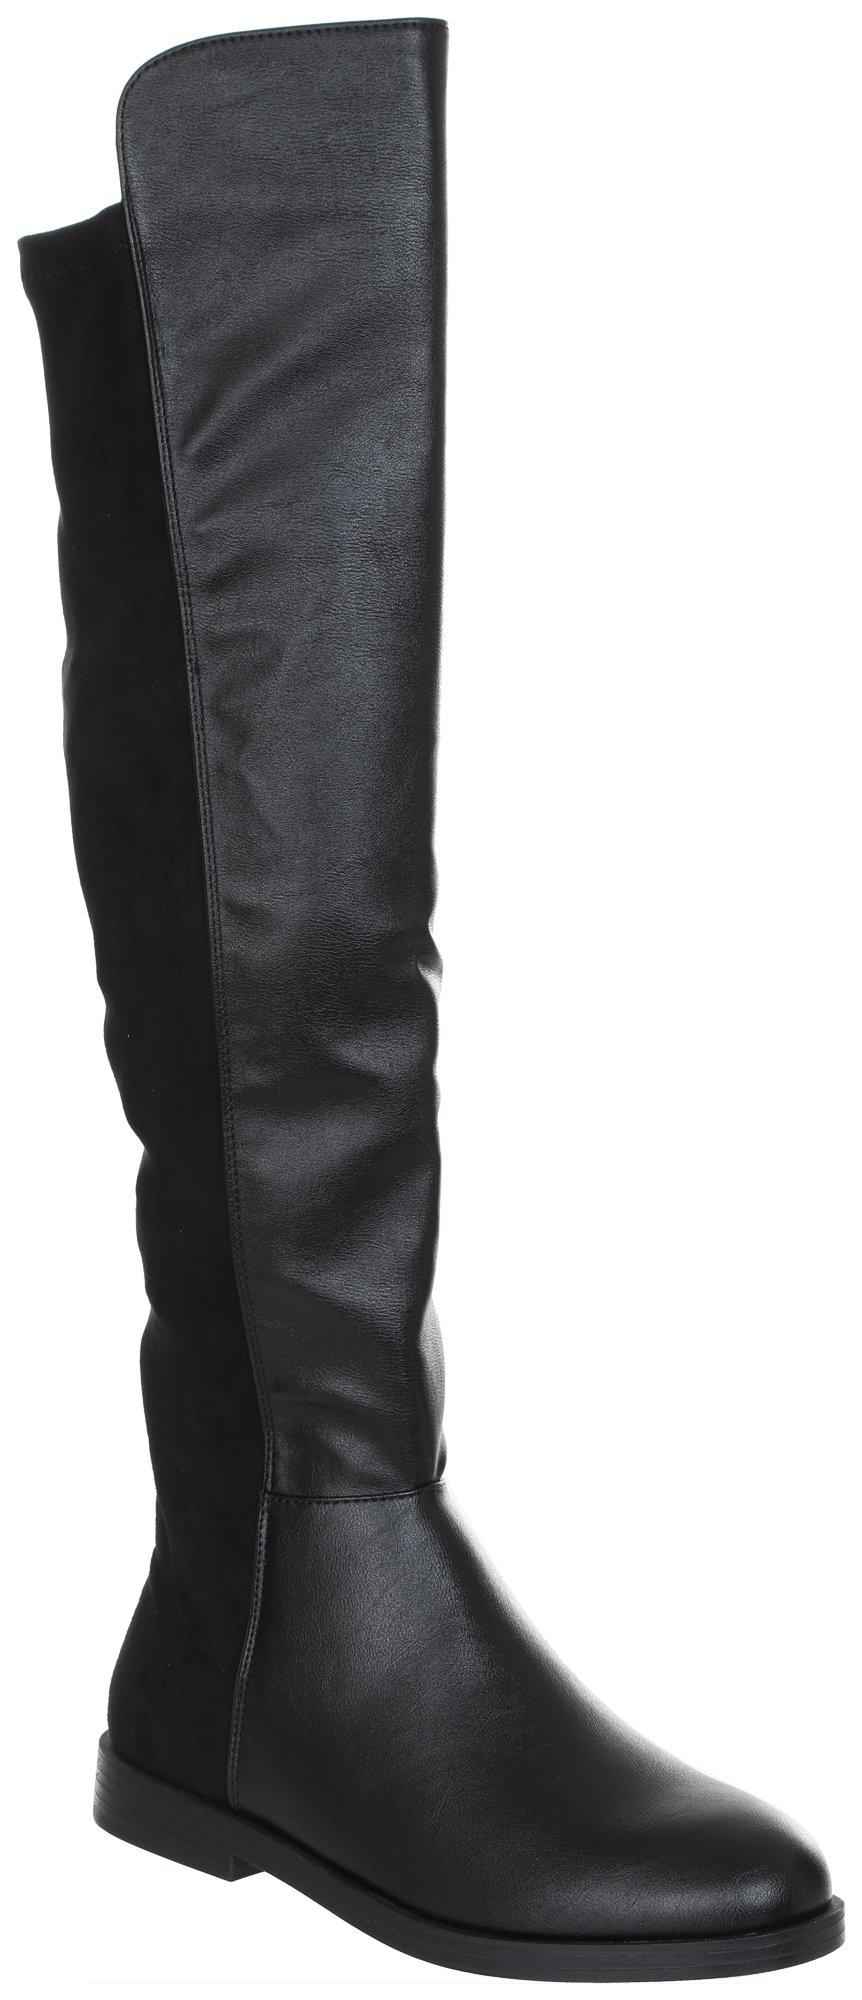 Women's Faux Leather Riding Boots